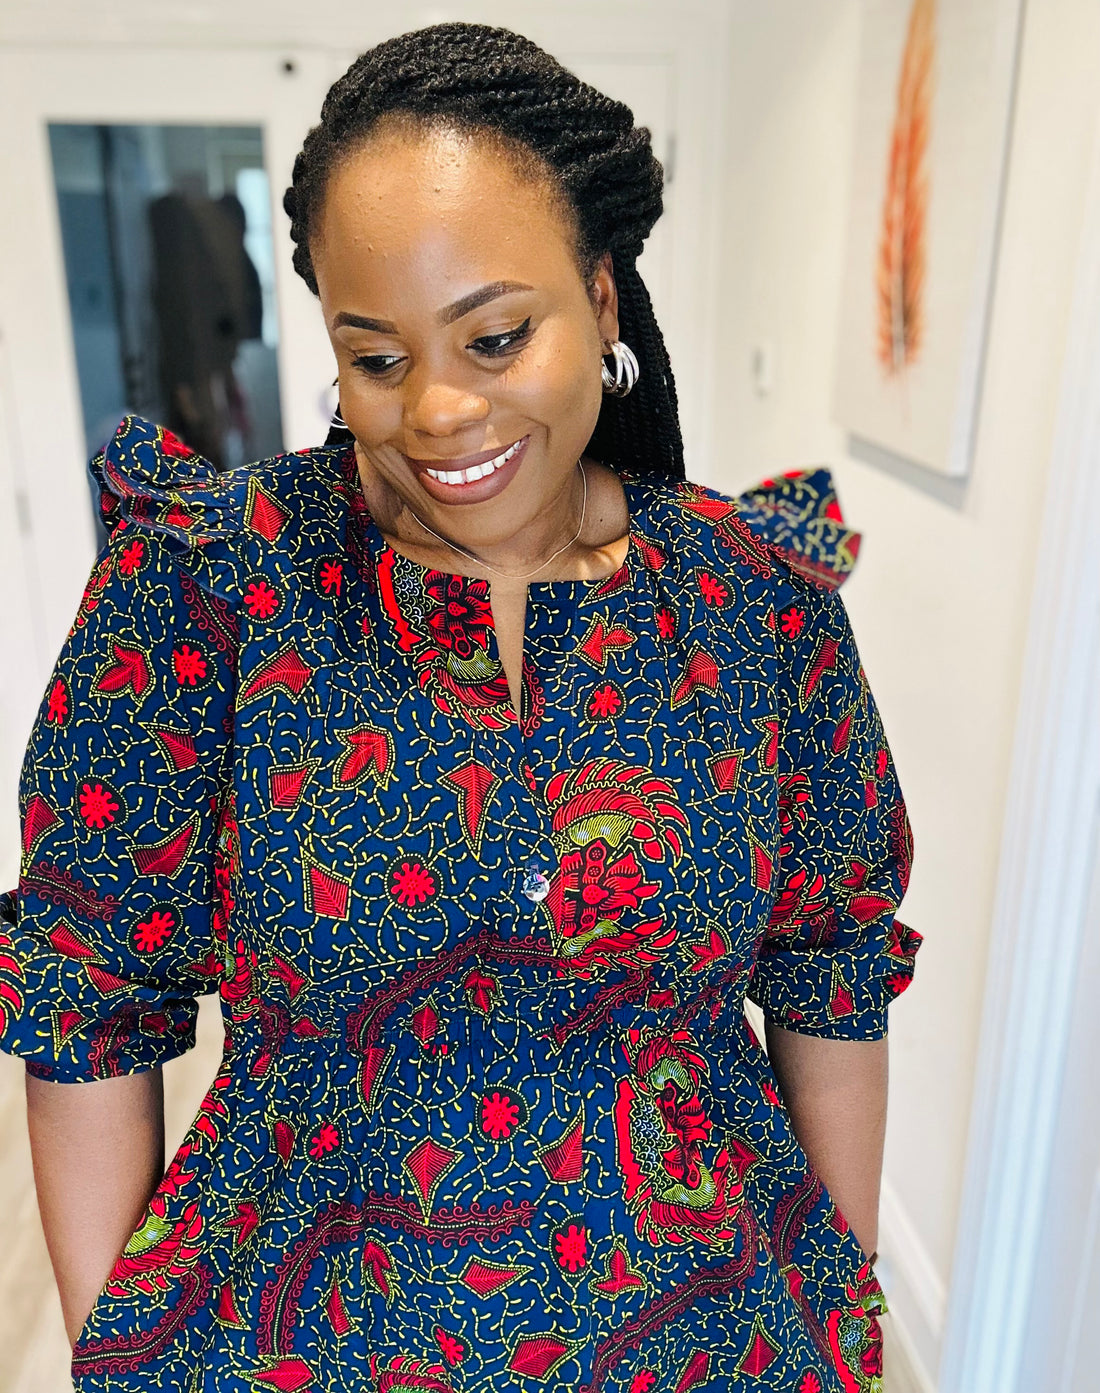   Anastacia Ogundare showcasing a bold ‘hack of the Anthea Blouse / dress by Anna Allen Patterns and the Davenport Dress by the Friday Pattern Company’  crafted with African print fabric from Dovetailed London, combining fashion and culture seamlessly."